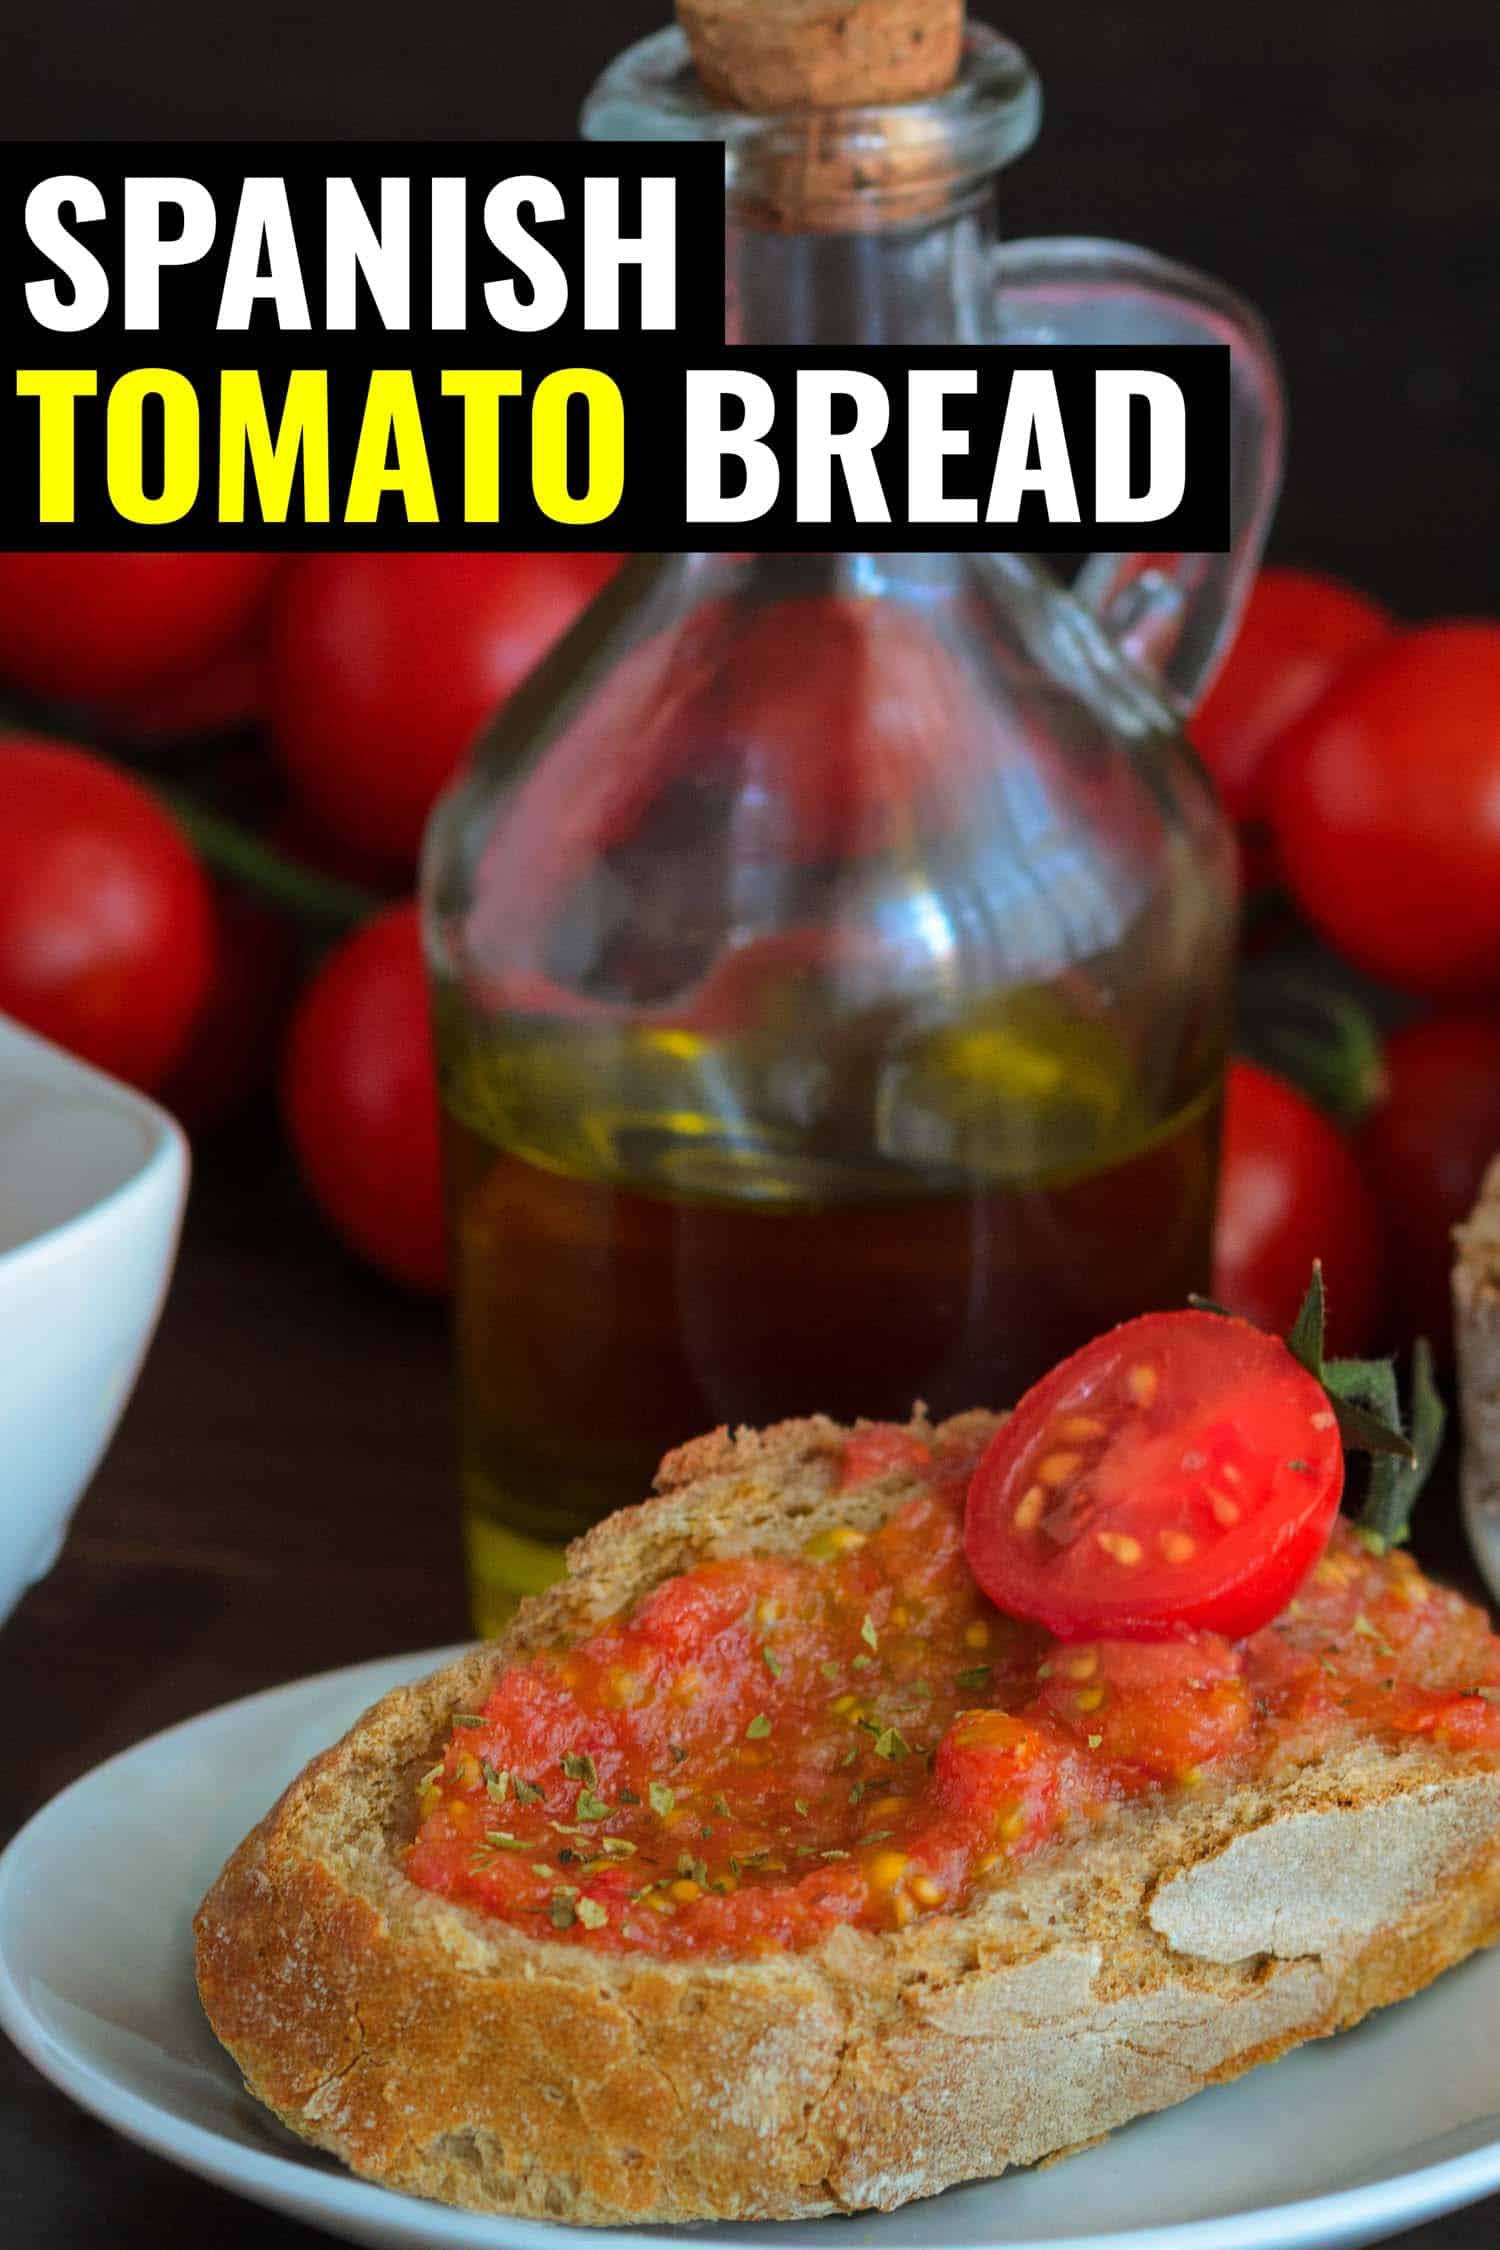 stale bread with tomato puree on it and olive oil in background